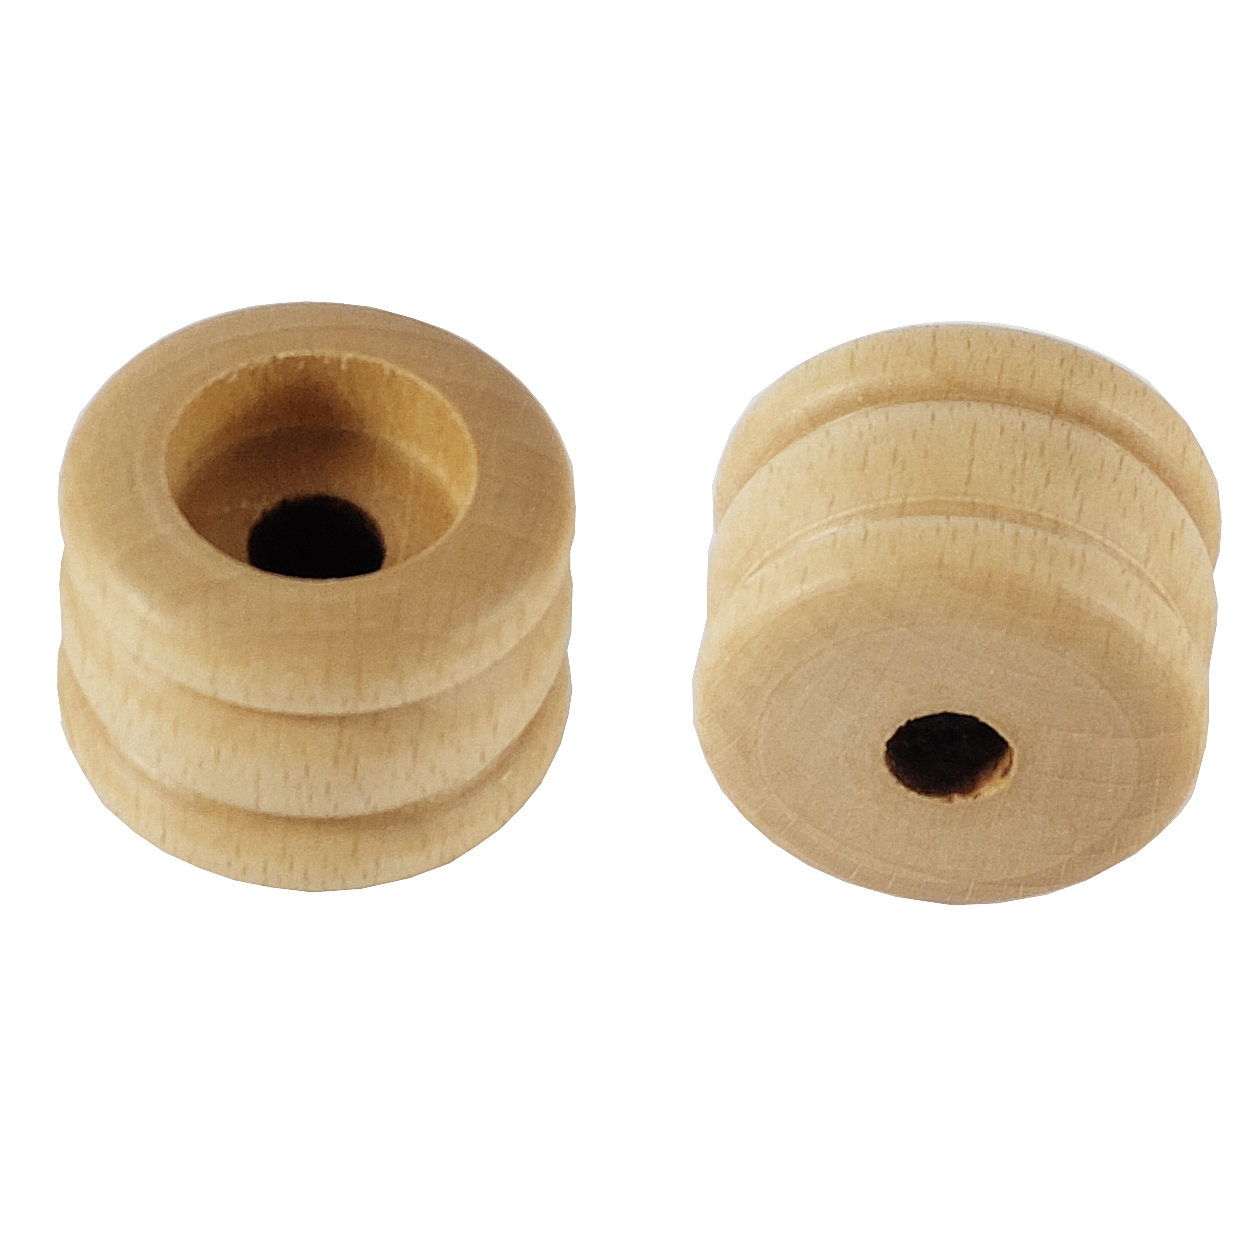 Wooden wheels for toys